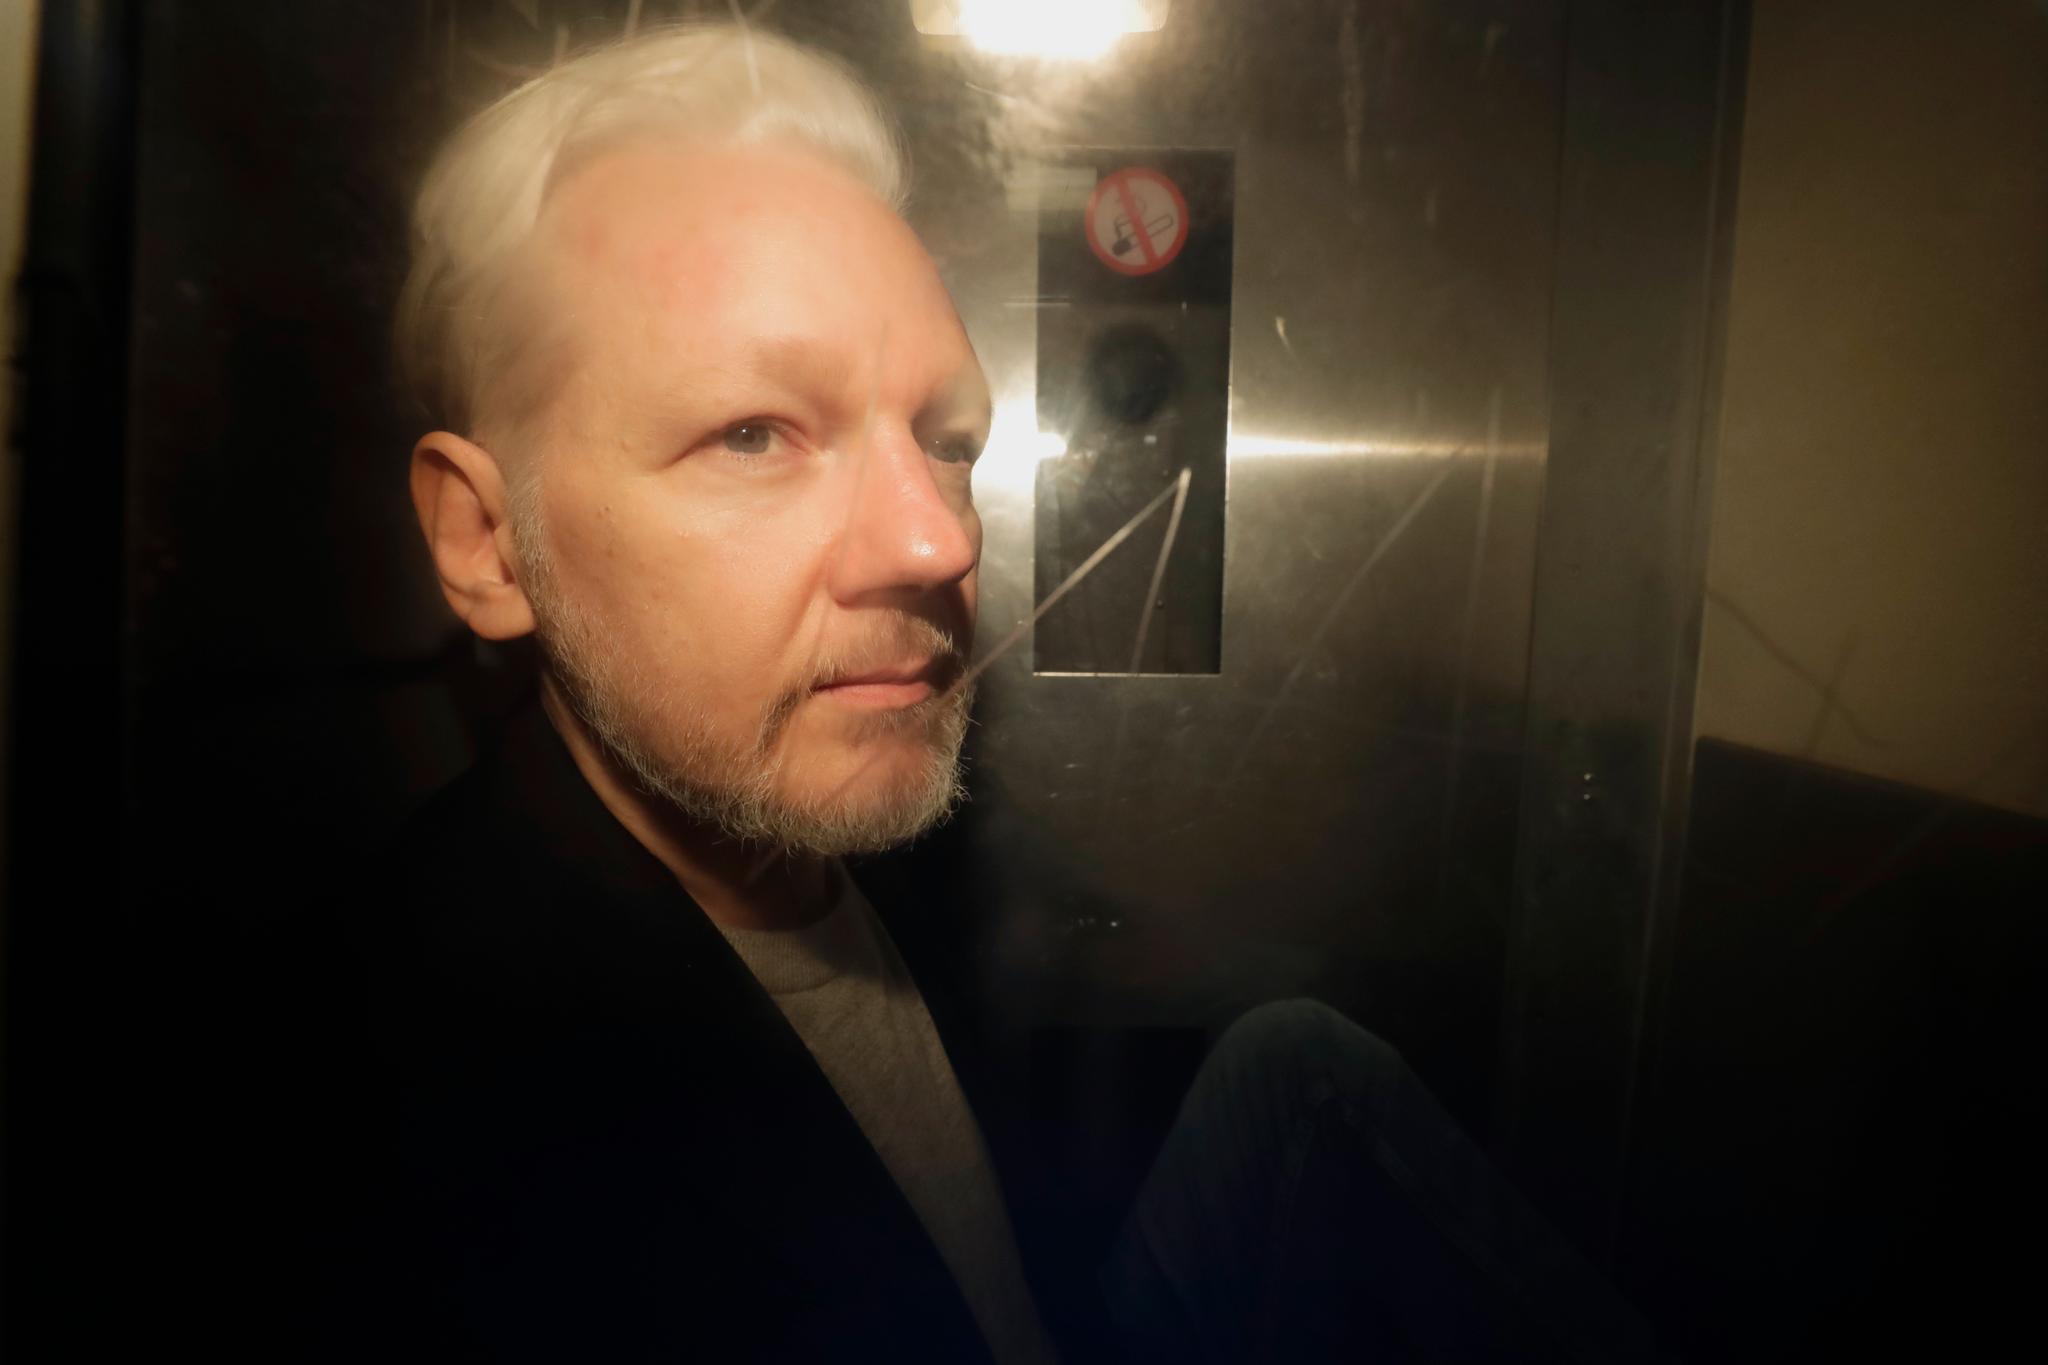 Doctors fear for Assange’s health in British prison